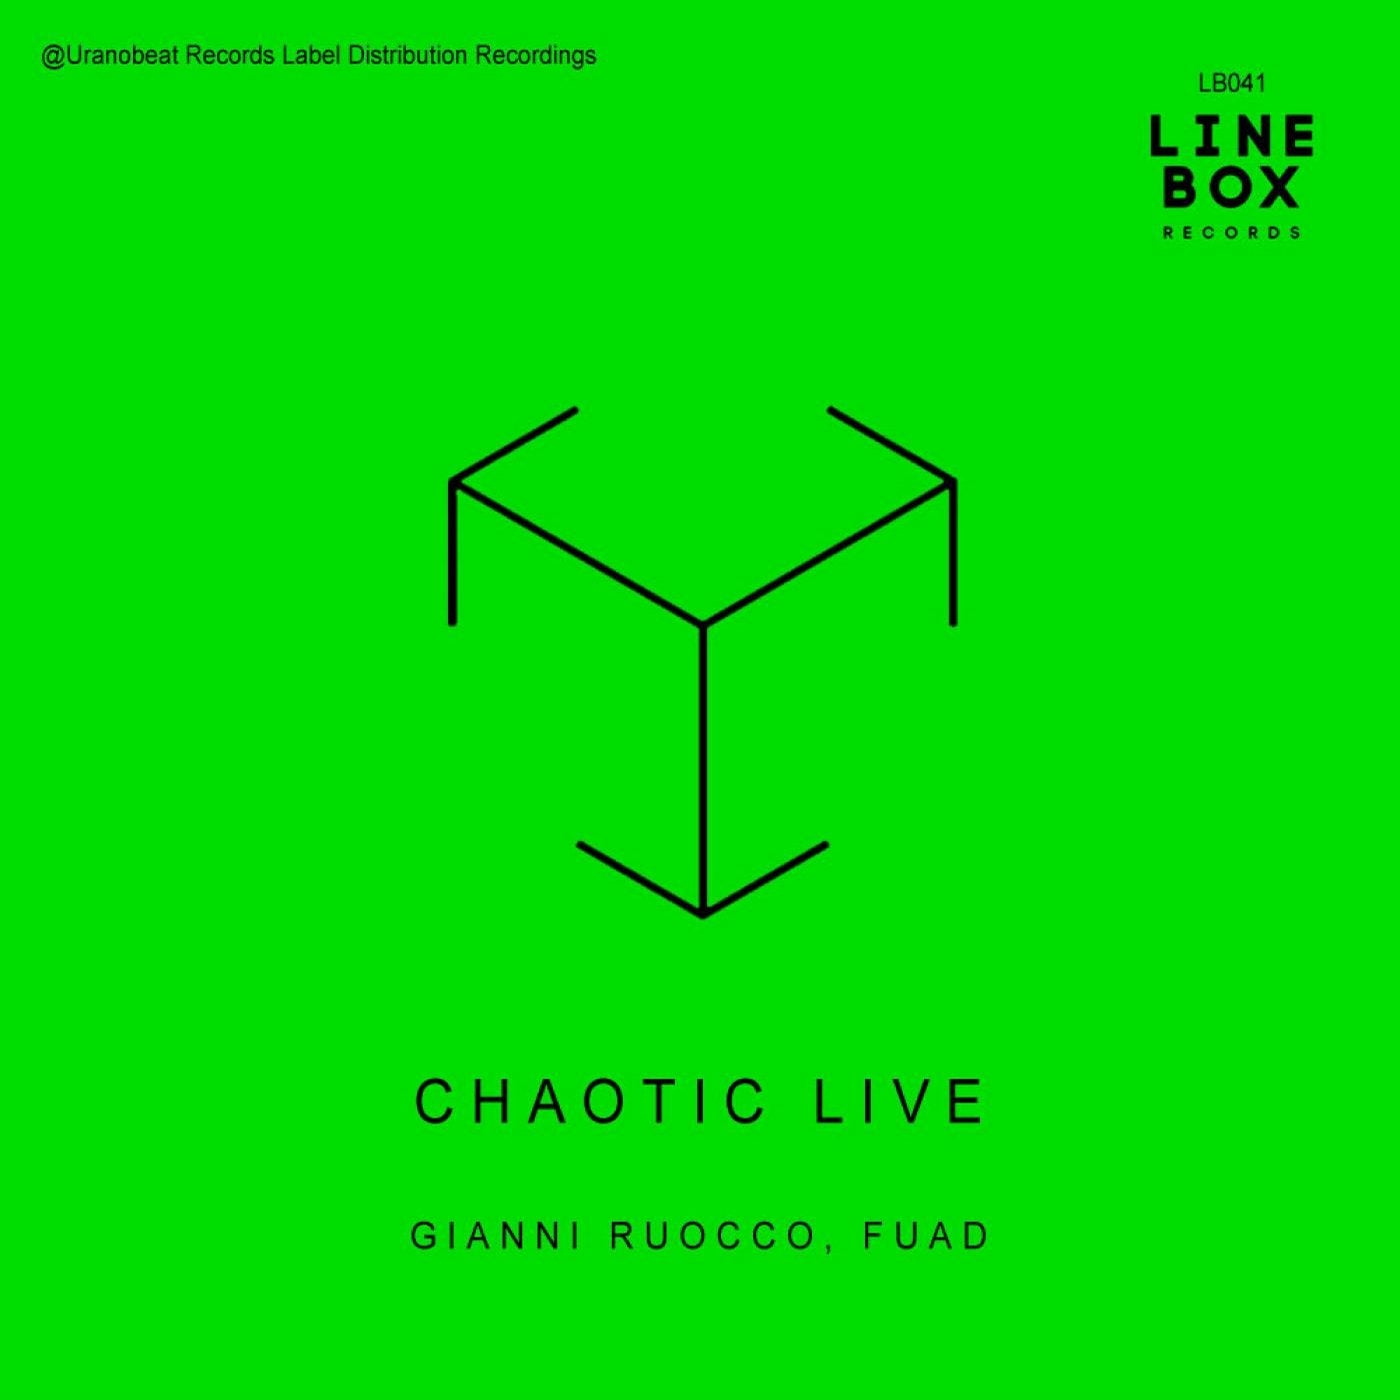 Chaotic Live